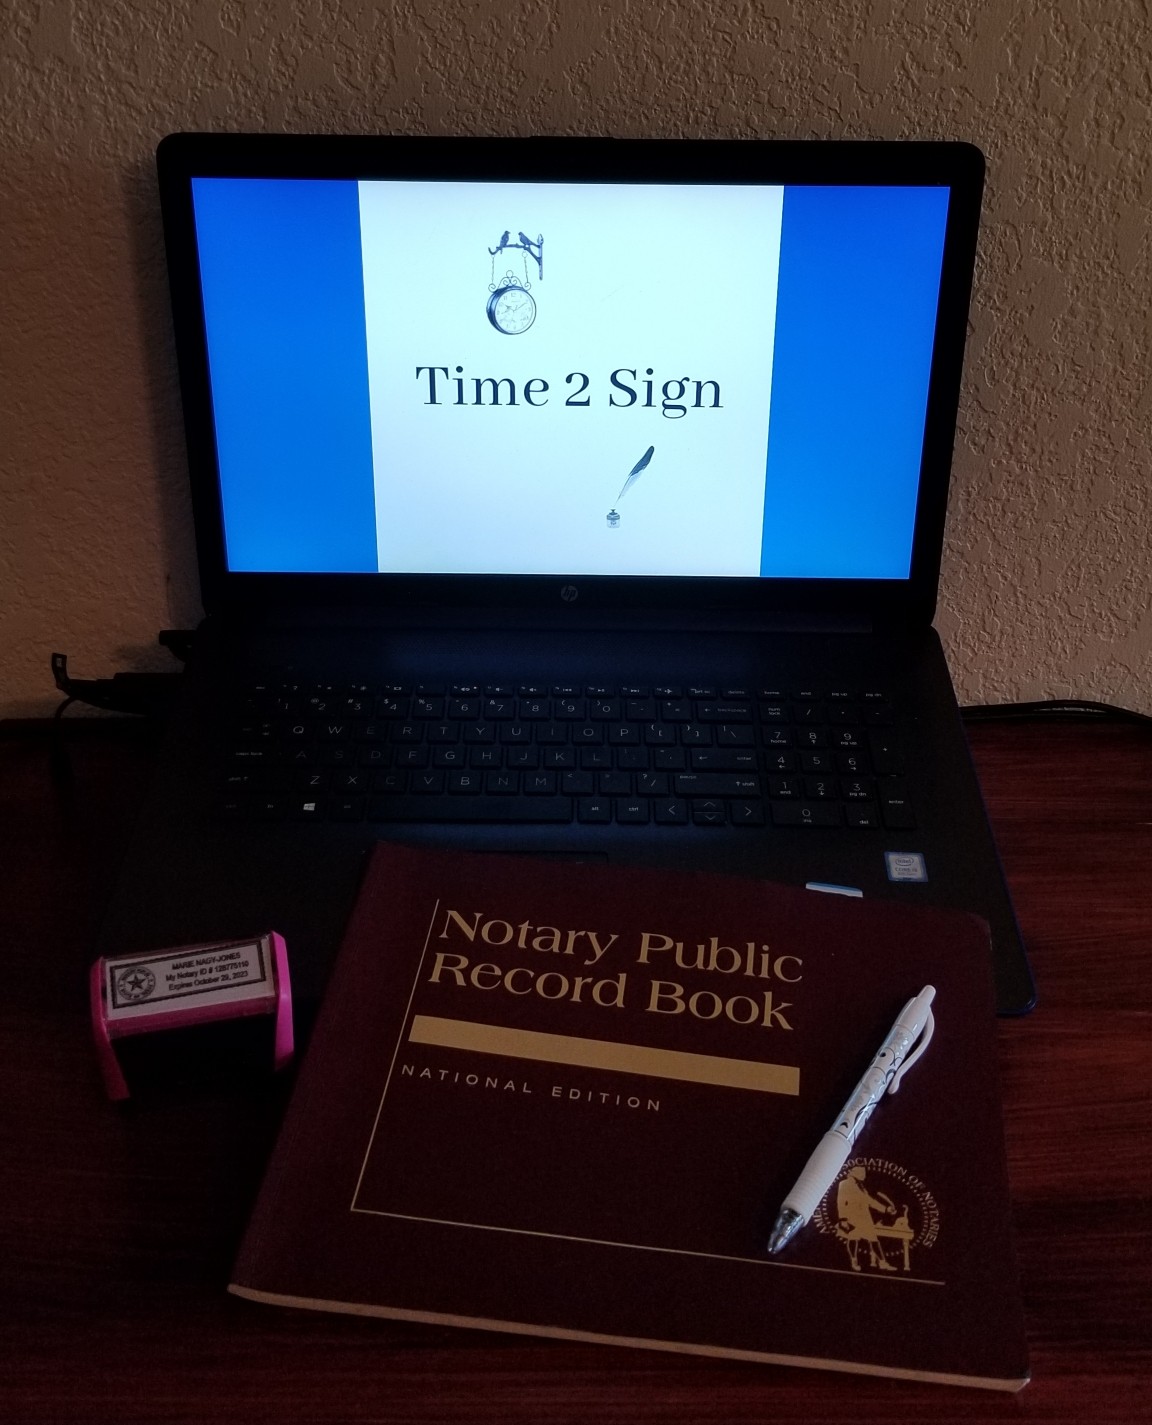 Laptop on and open with old logo on screen, Notary Journal, Pen lying on journal, Notary Stamp